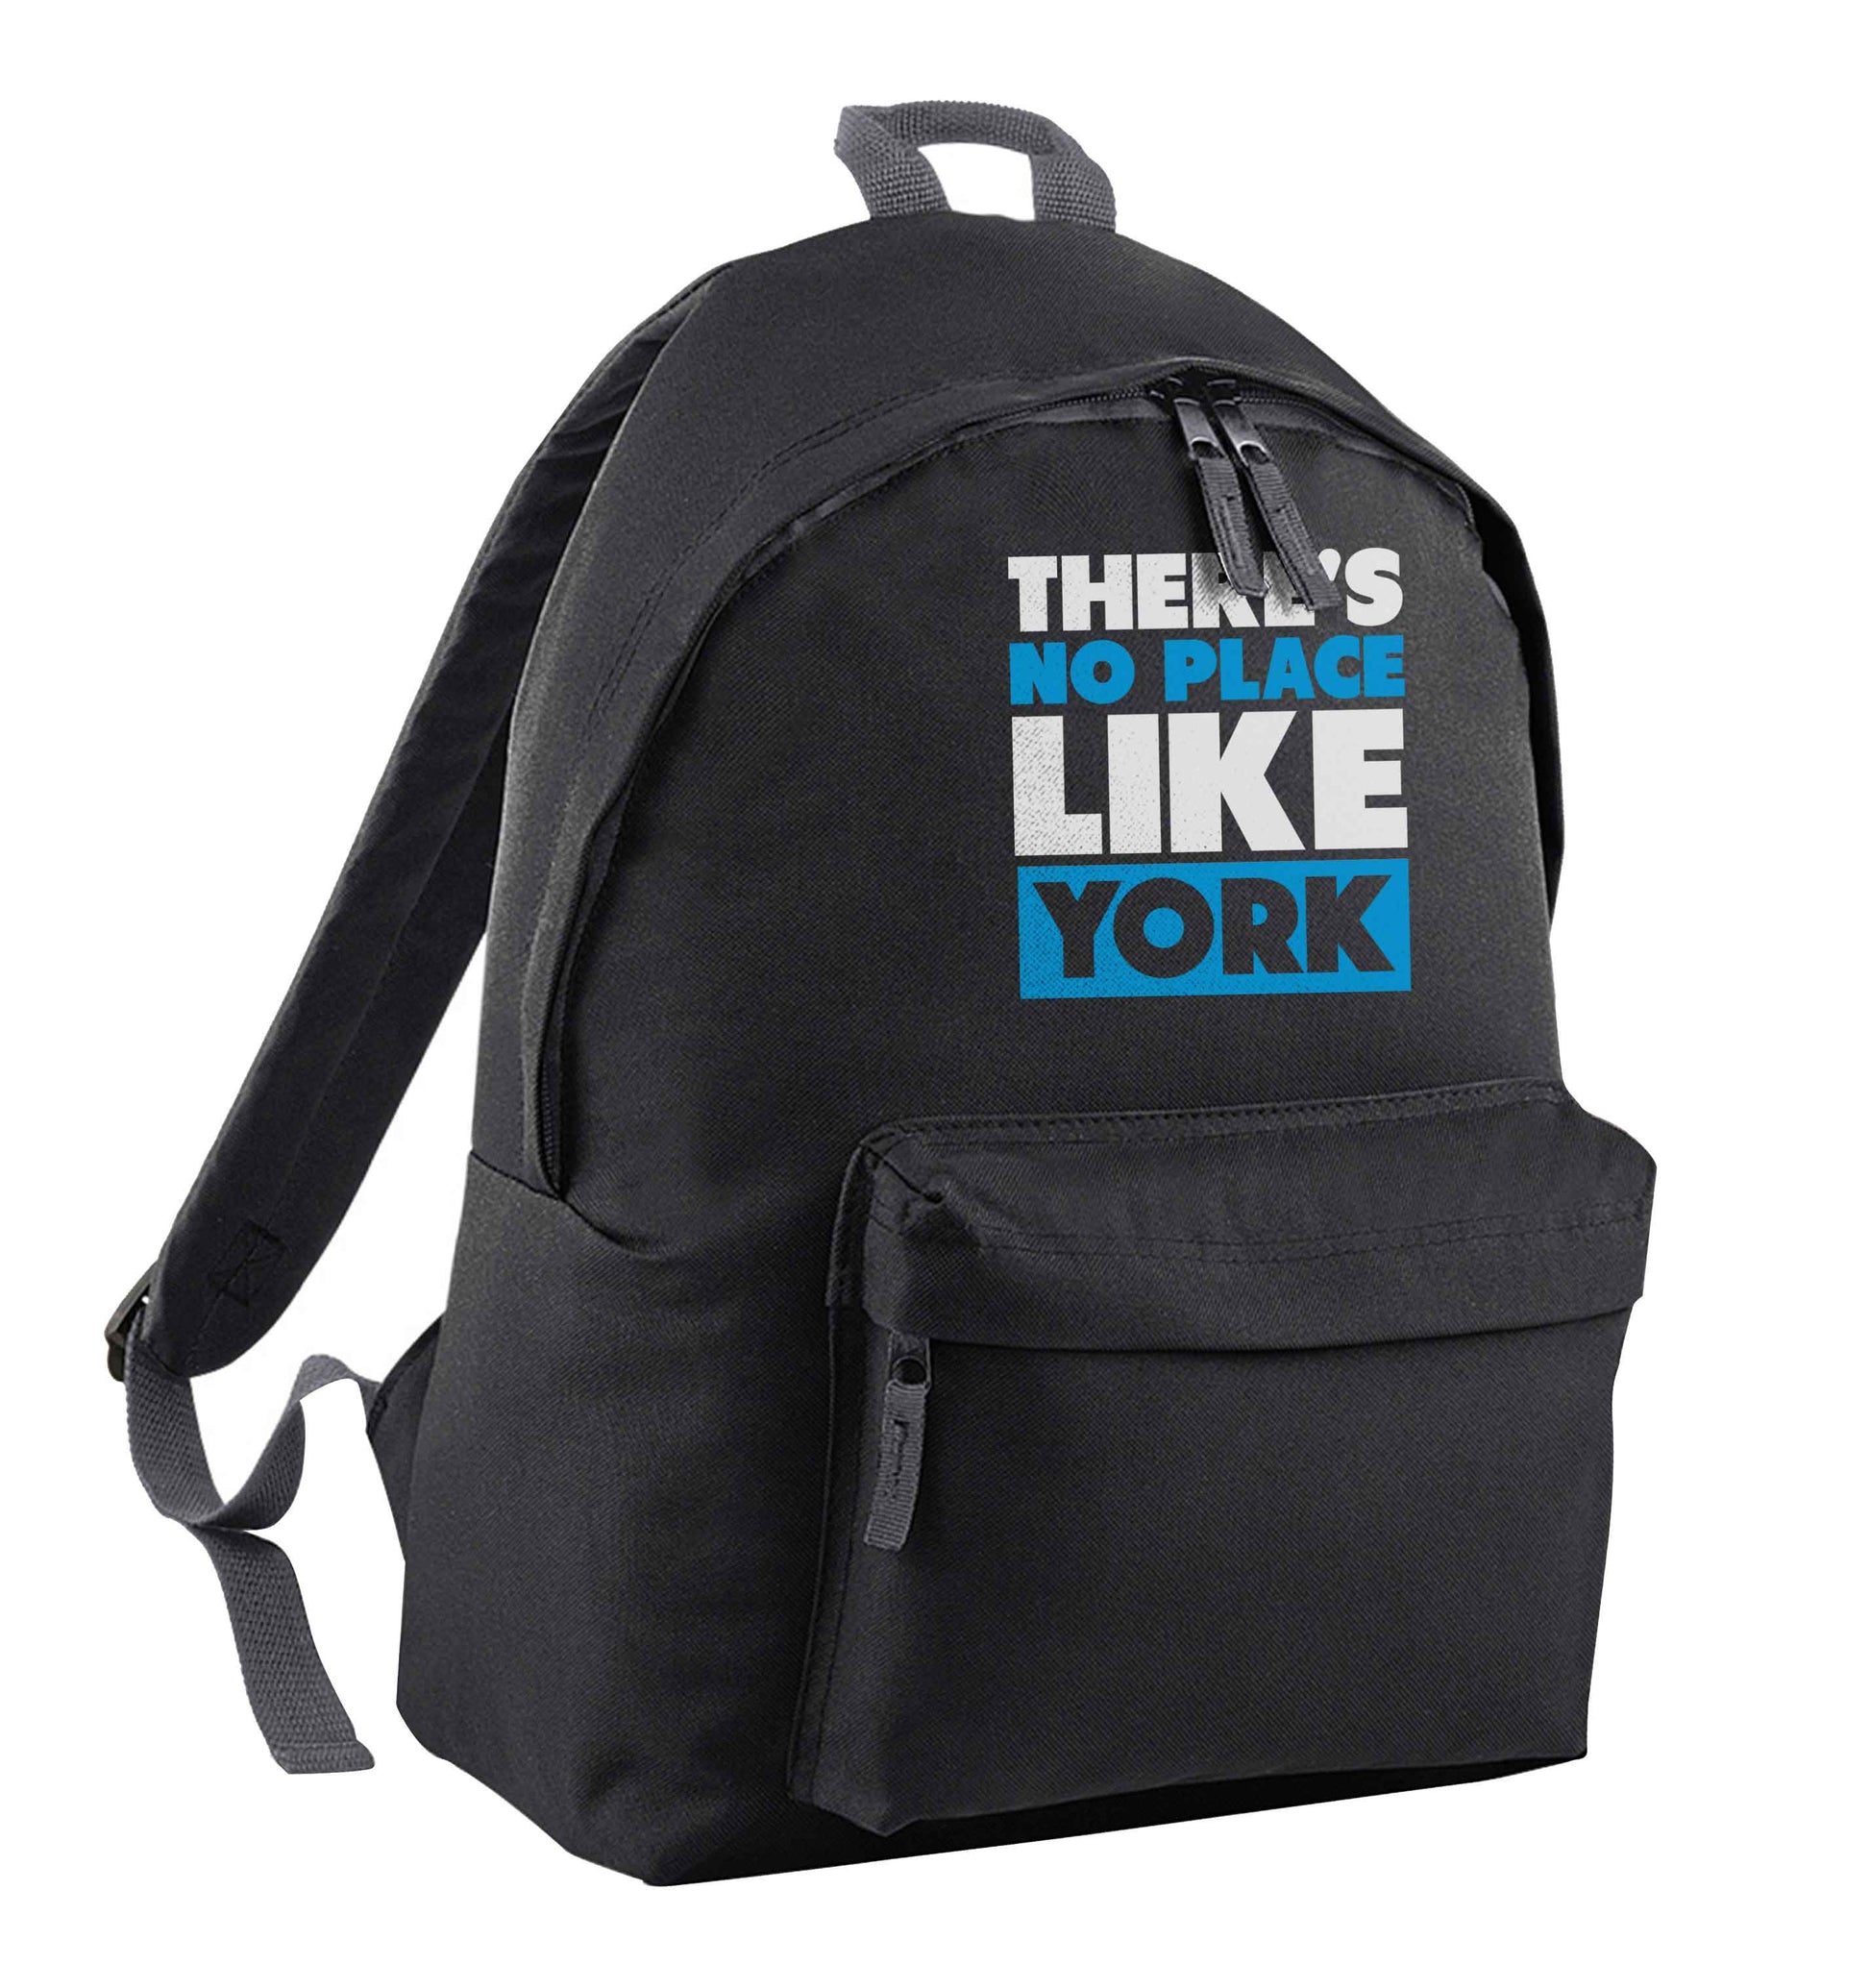 There's no place like york black adults backpack